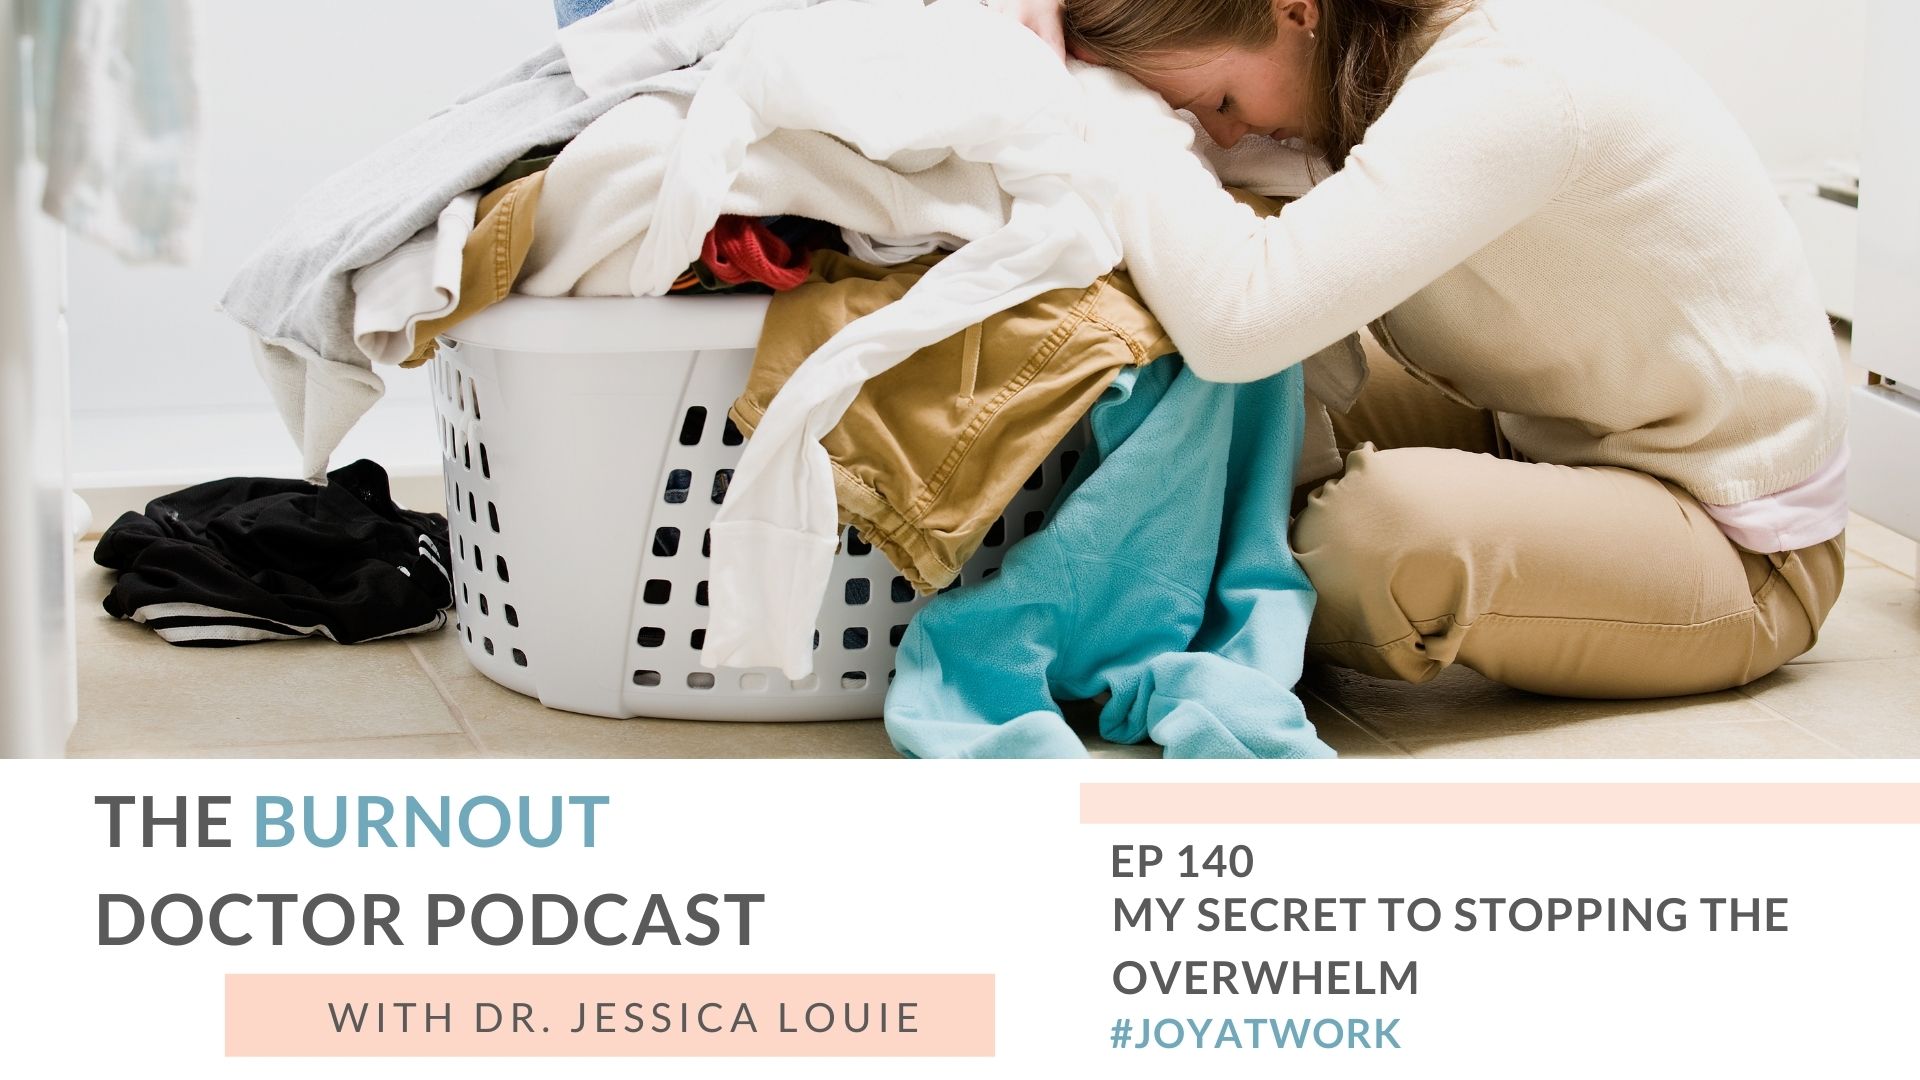 My secret to stopping overwhelm. Stop feeling overwhelmed all the time. Stop overwhelm exhaustion. The Burnout Doctor Podcast. Keynote speaker on burnout, simplifying, well-being.